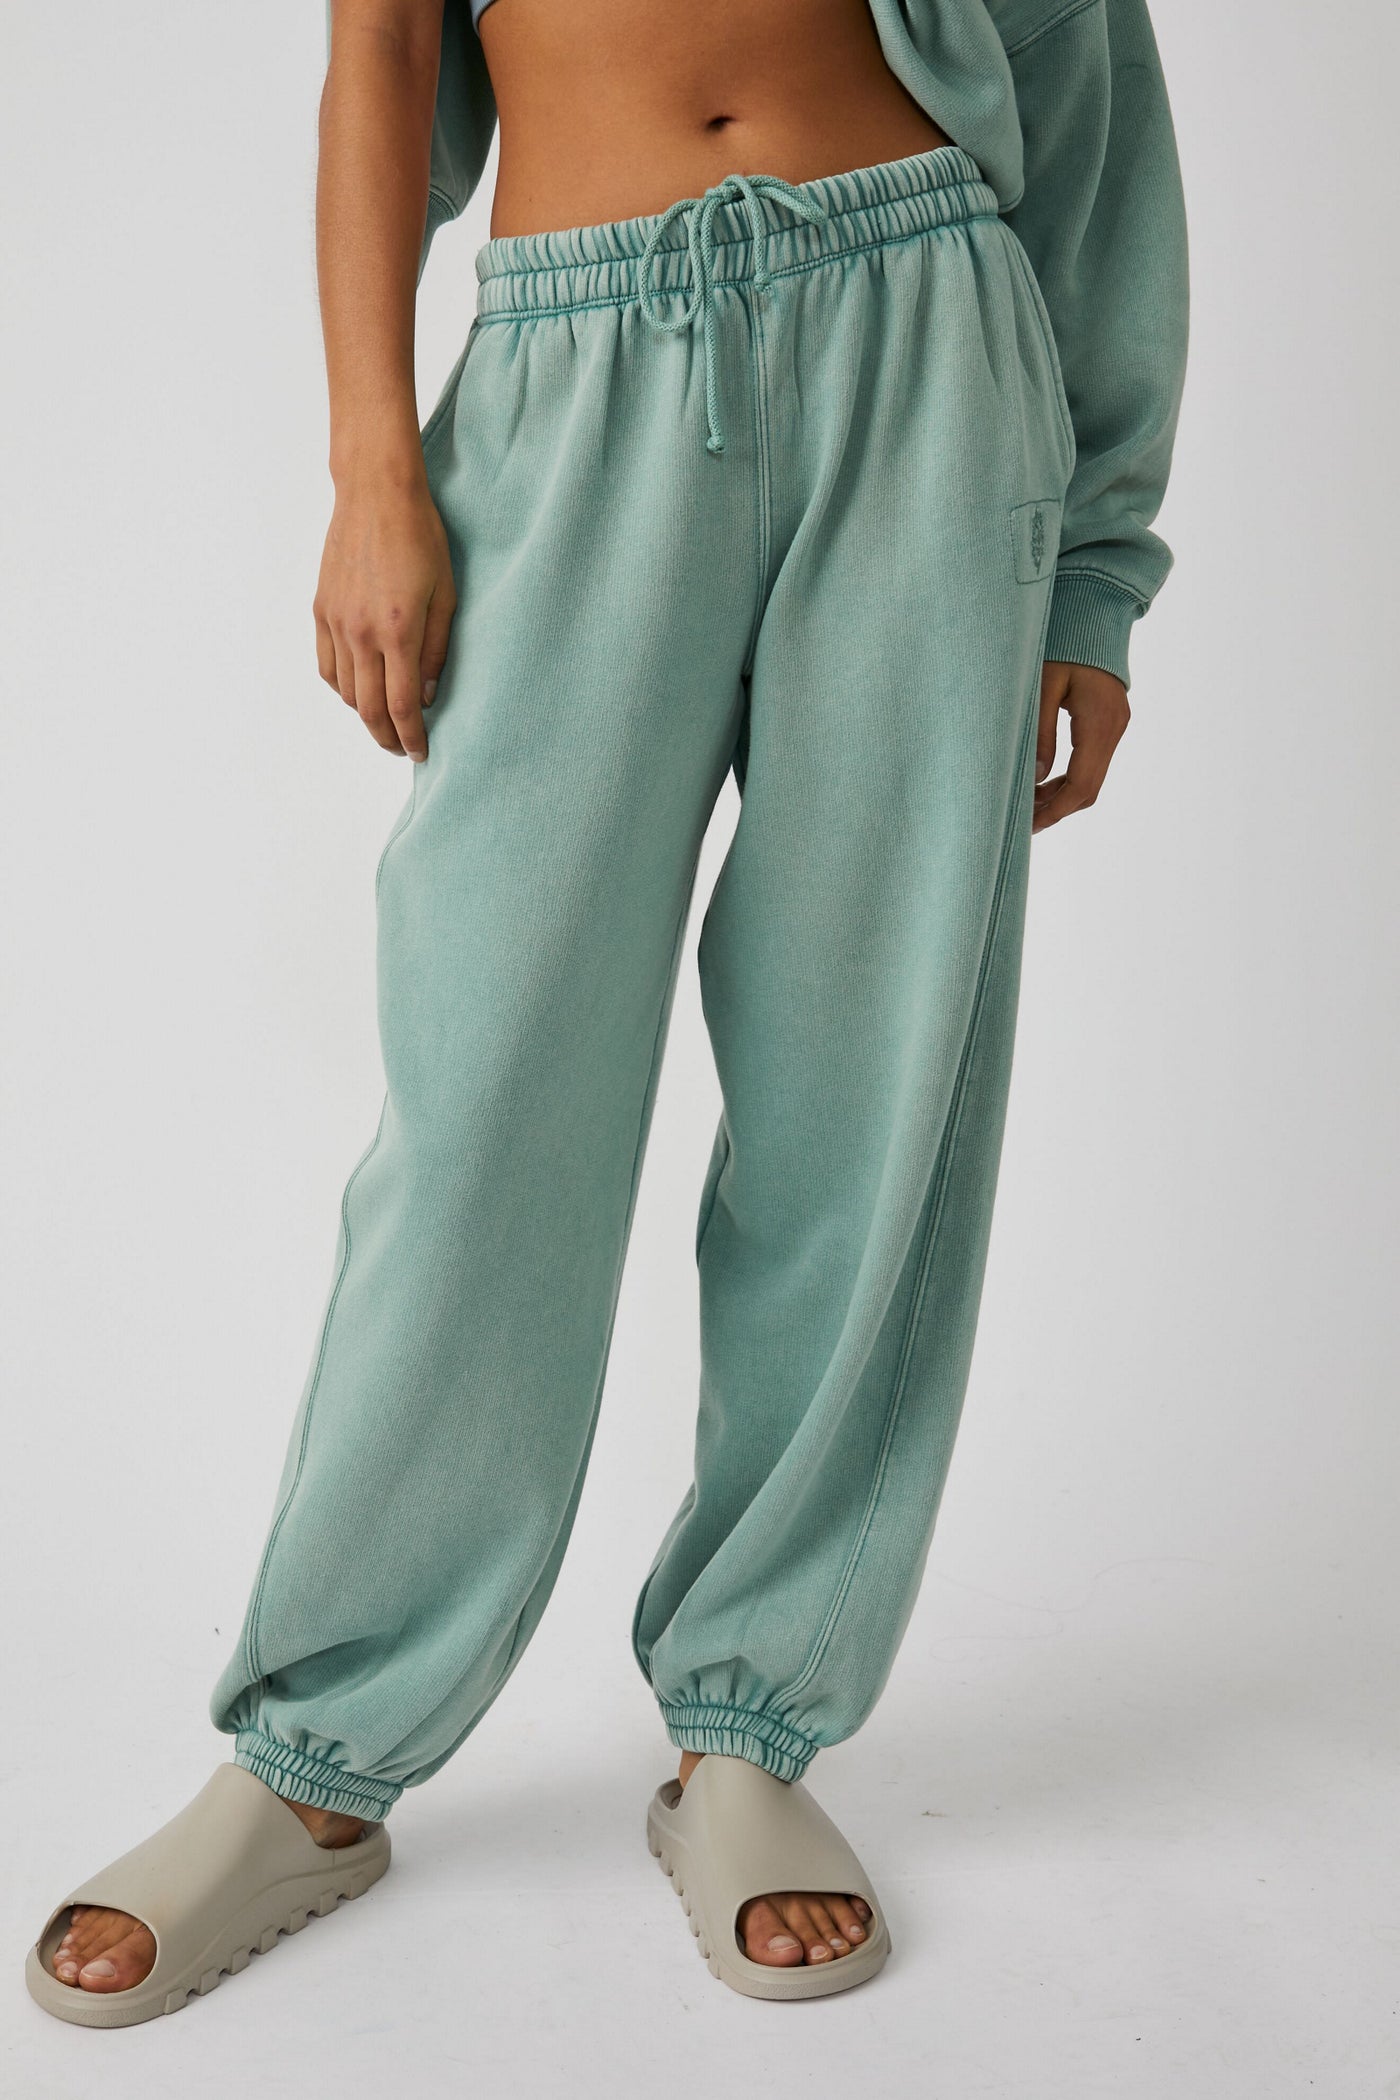 Free People All Star Pant - Emerald